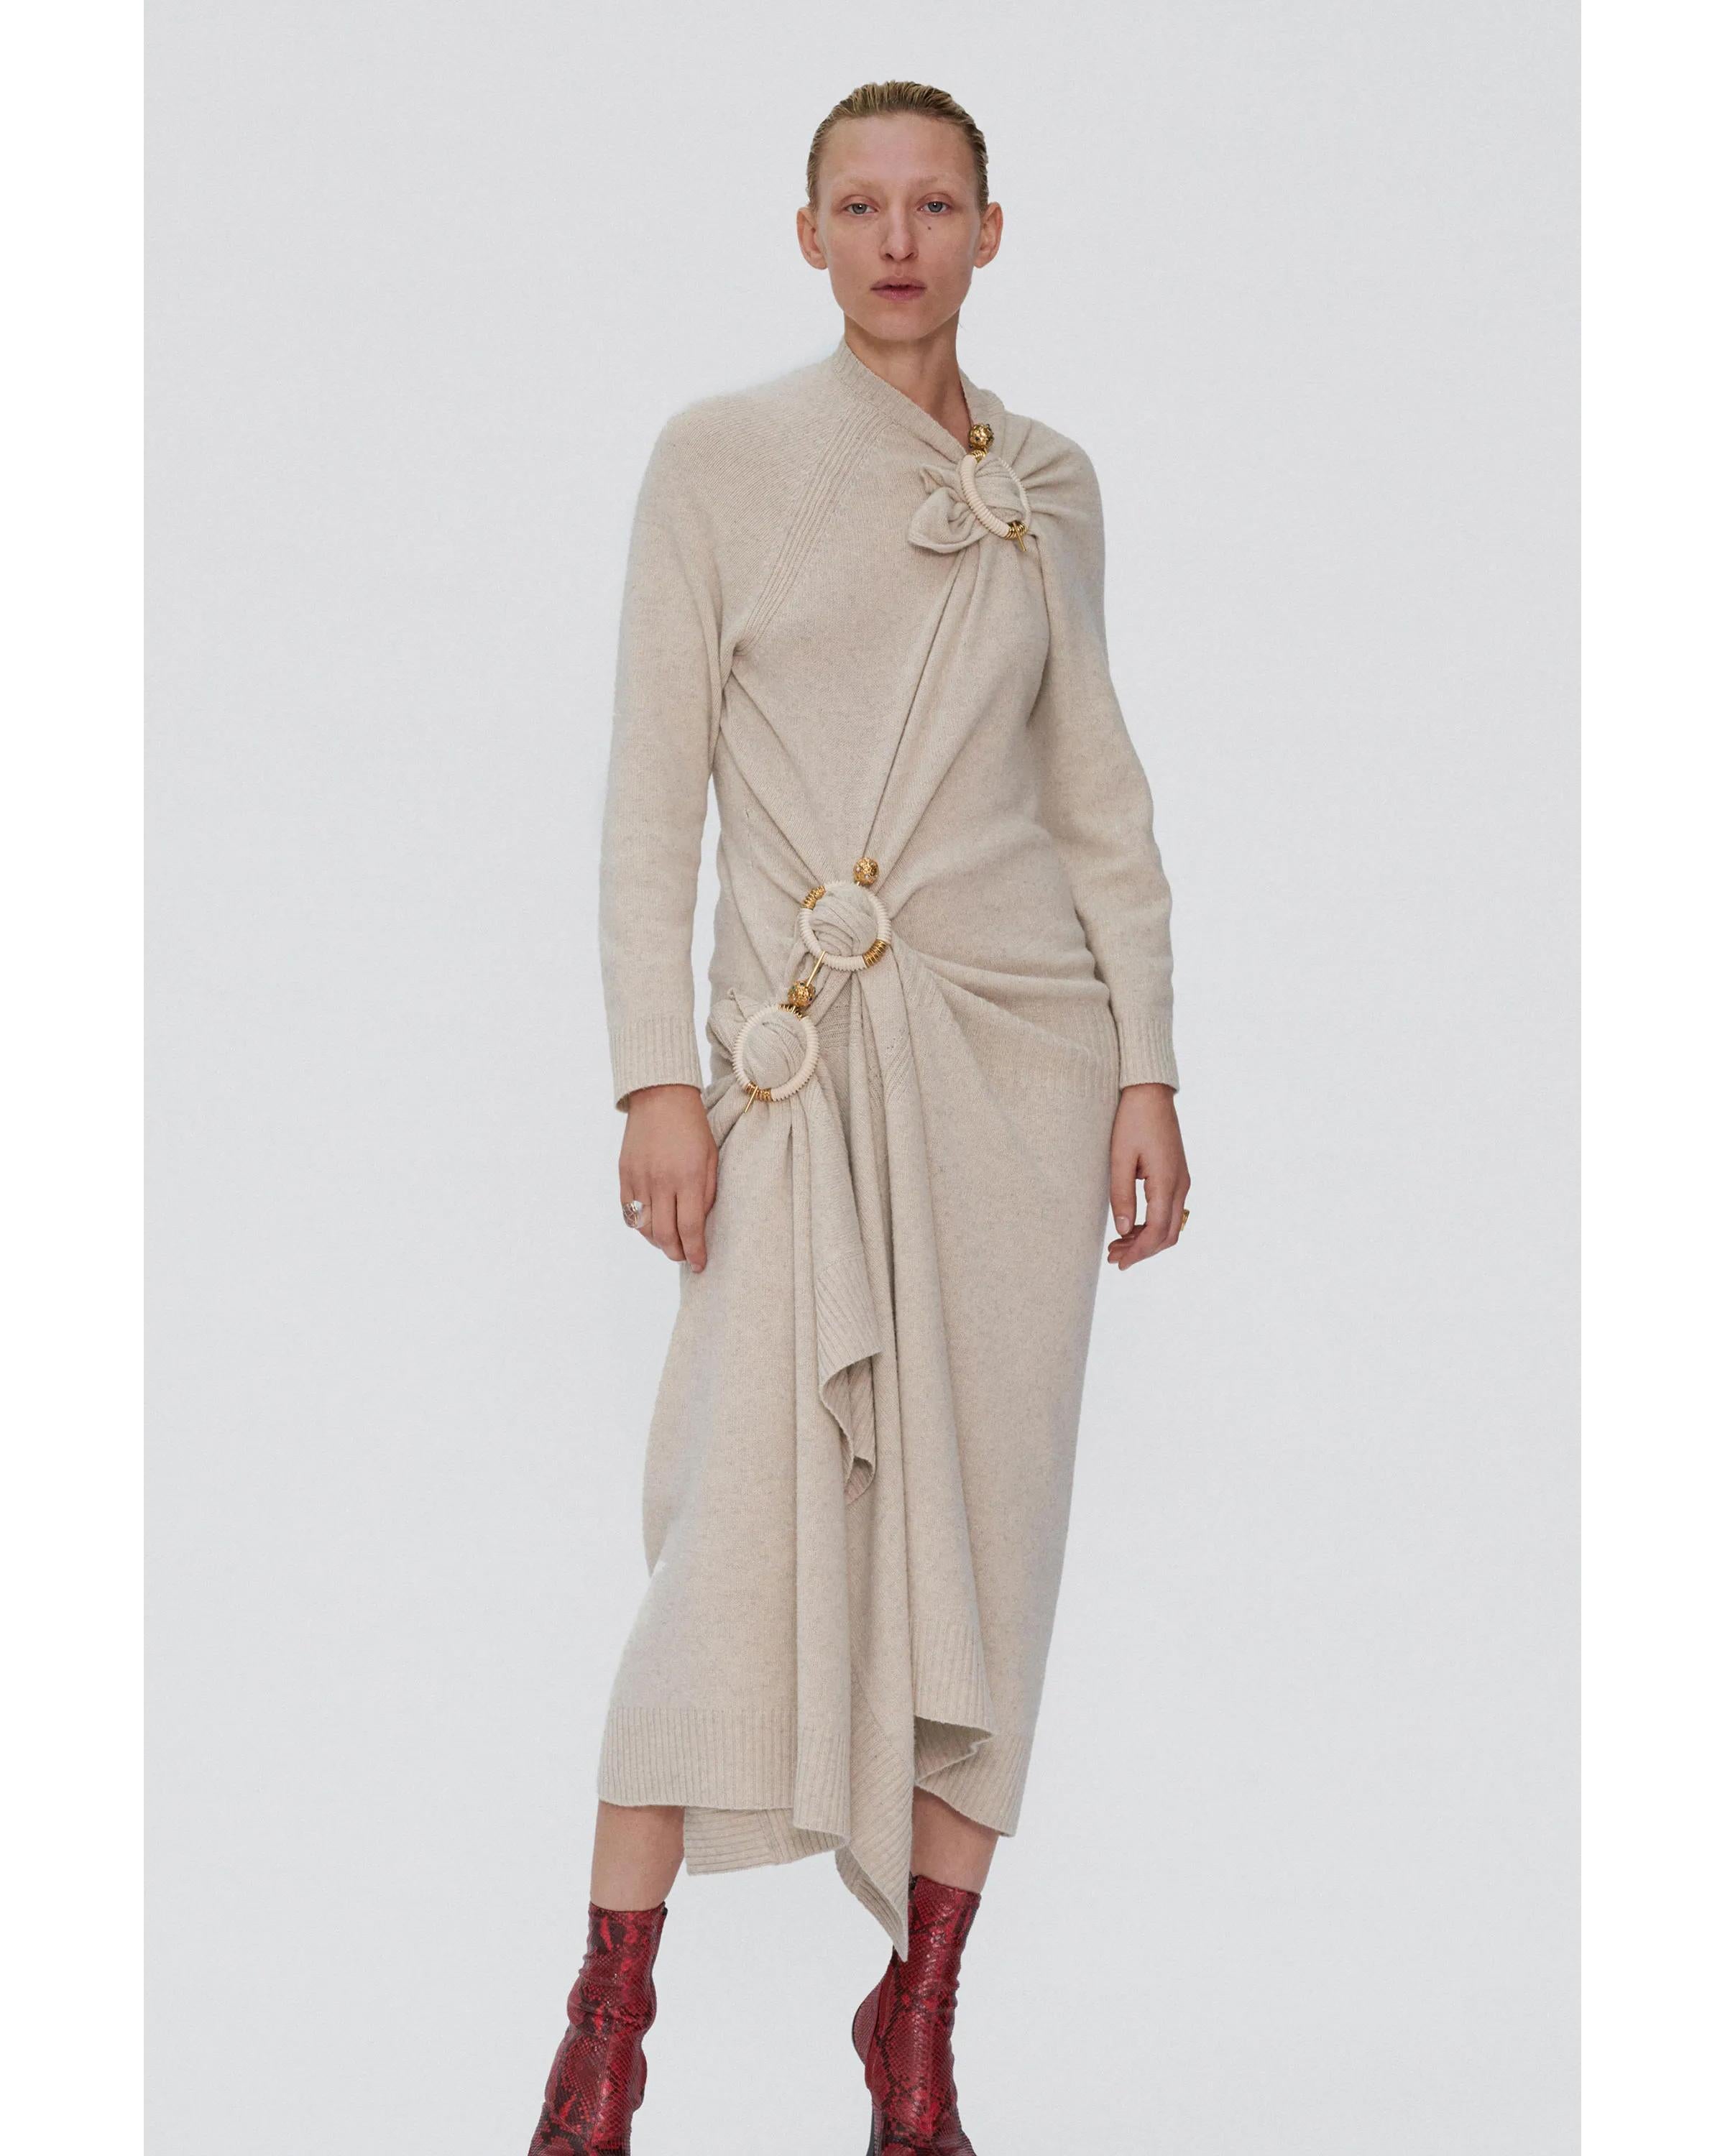 A/W 2018 Old Céline by Phoebe Philo cream knit wool blend midi dress. Asymmetrical dress with snap waist closure and layered skirt. Features ribbed trim details throughout with minor stretch. As seen in the lookbook (Look 20), styled with pins (not